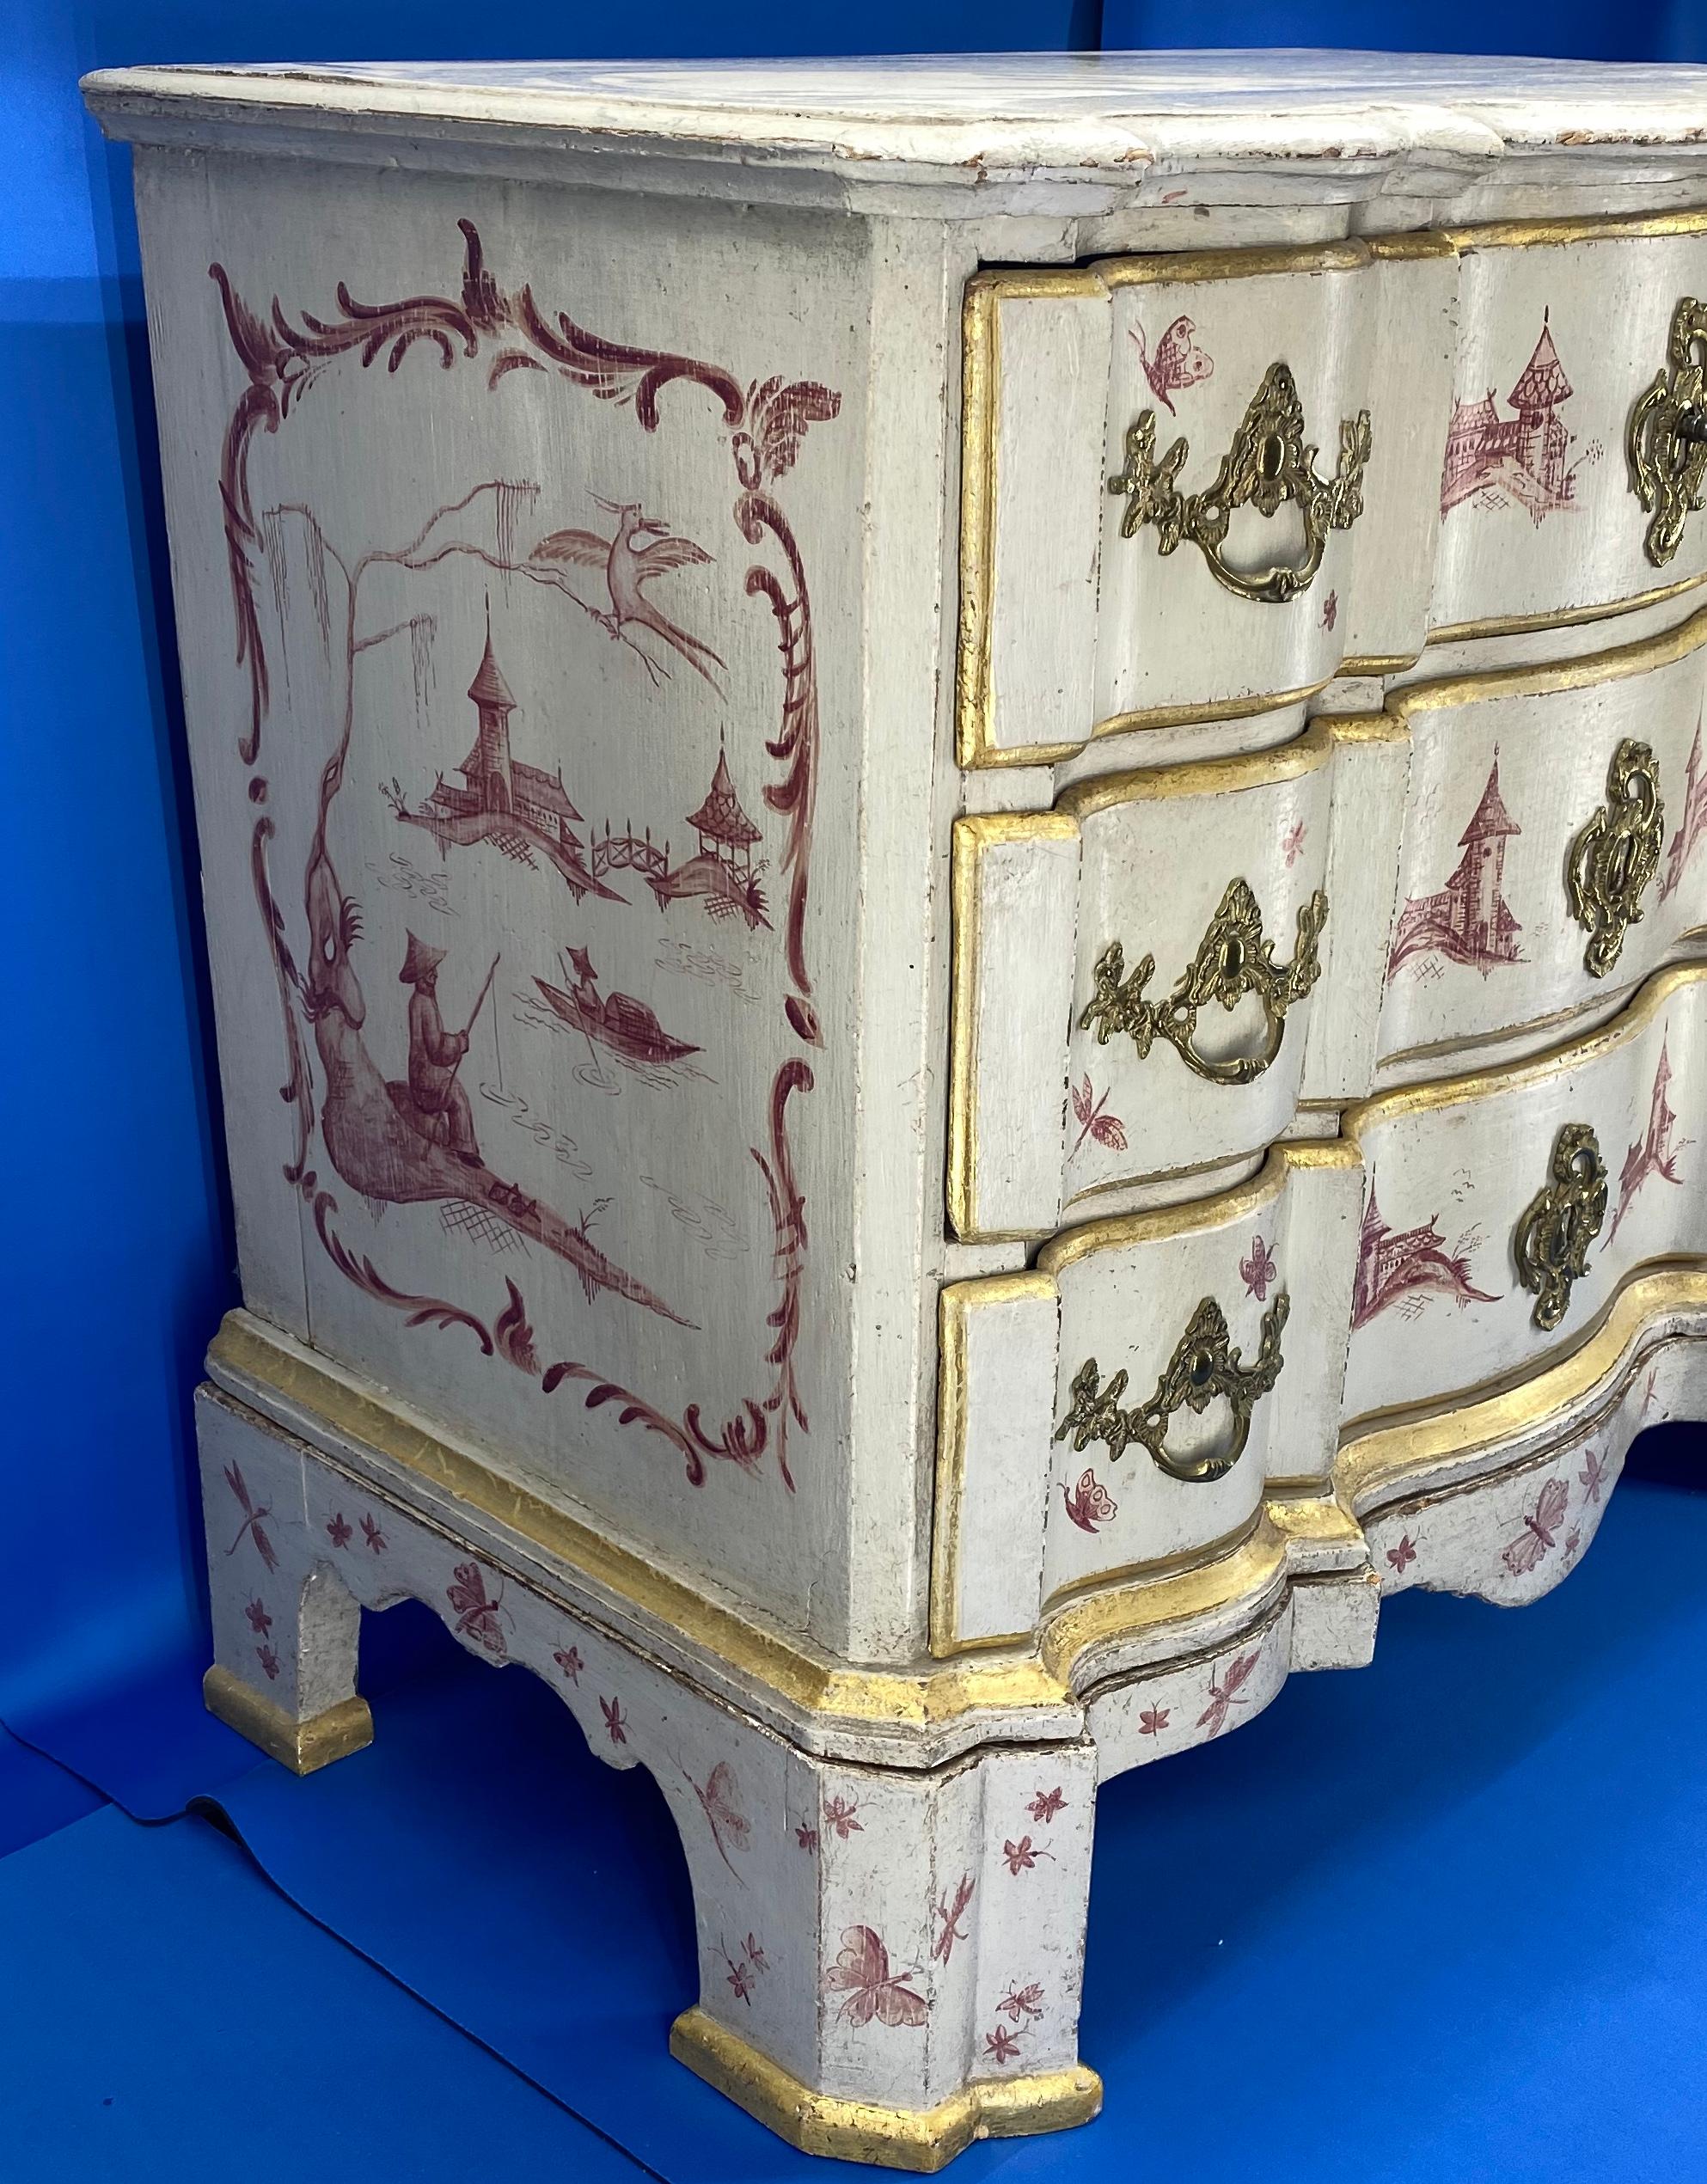 Baroque Danish 18th Century Painted Chest of Drawers With Chinoiserie Decor For Sale